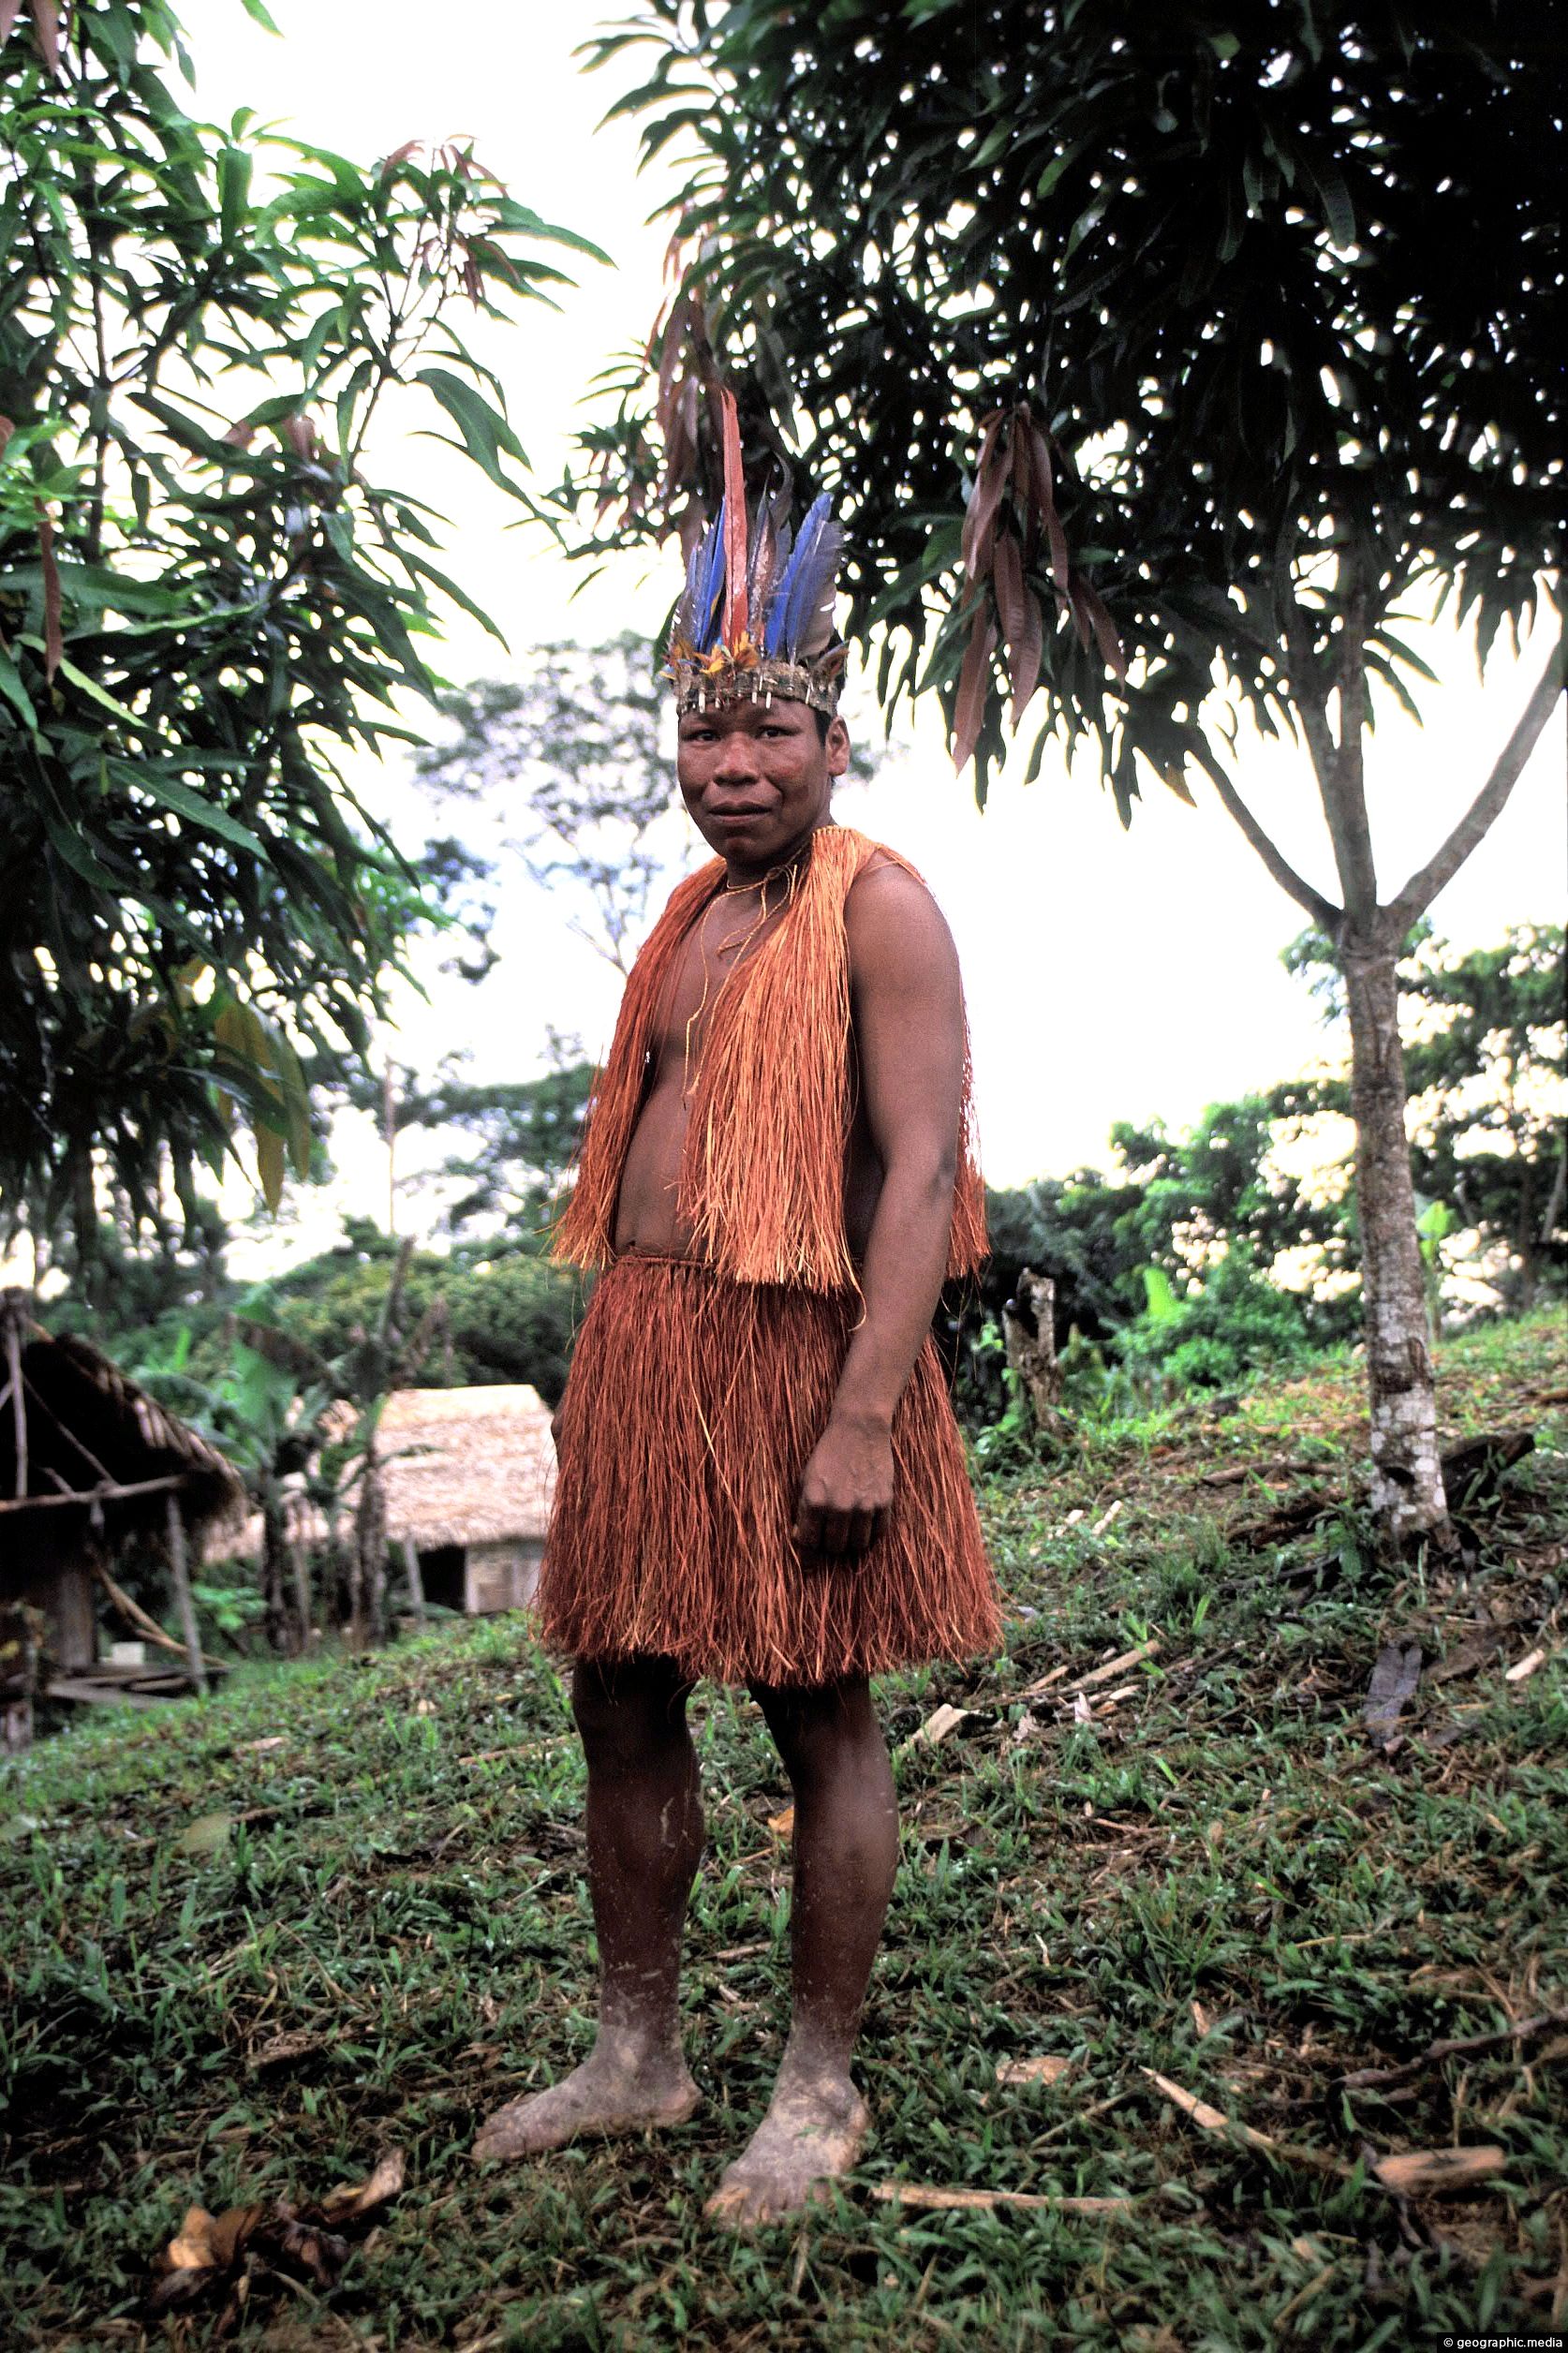 Shaman in the Colombian Amazon